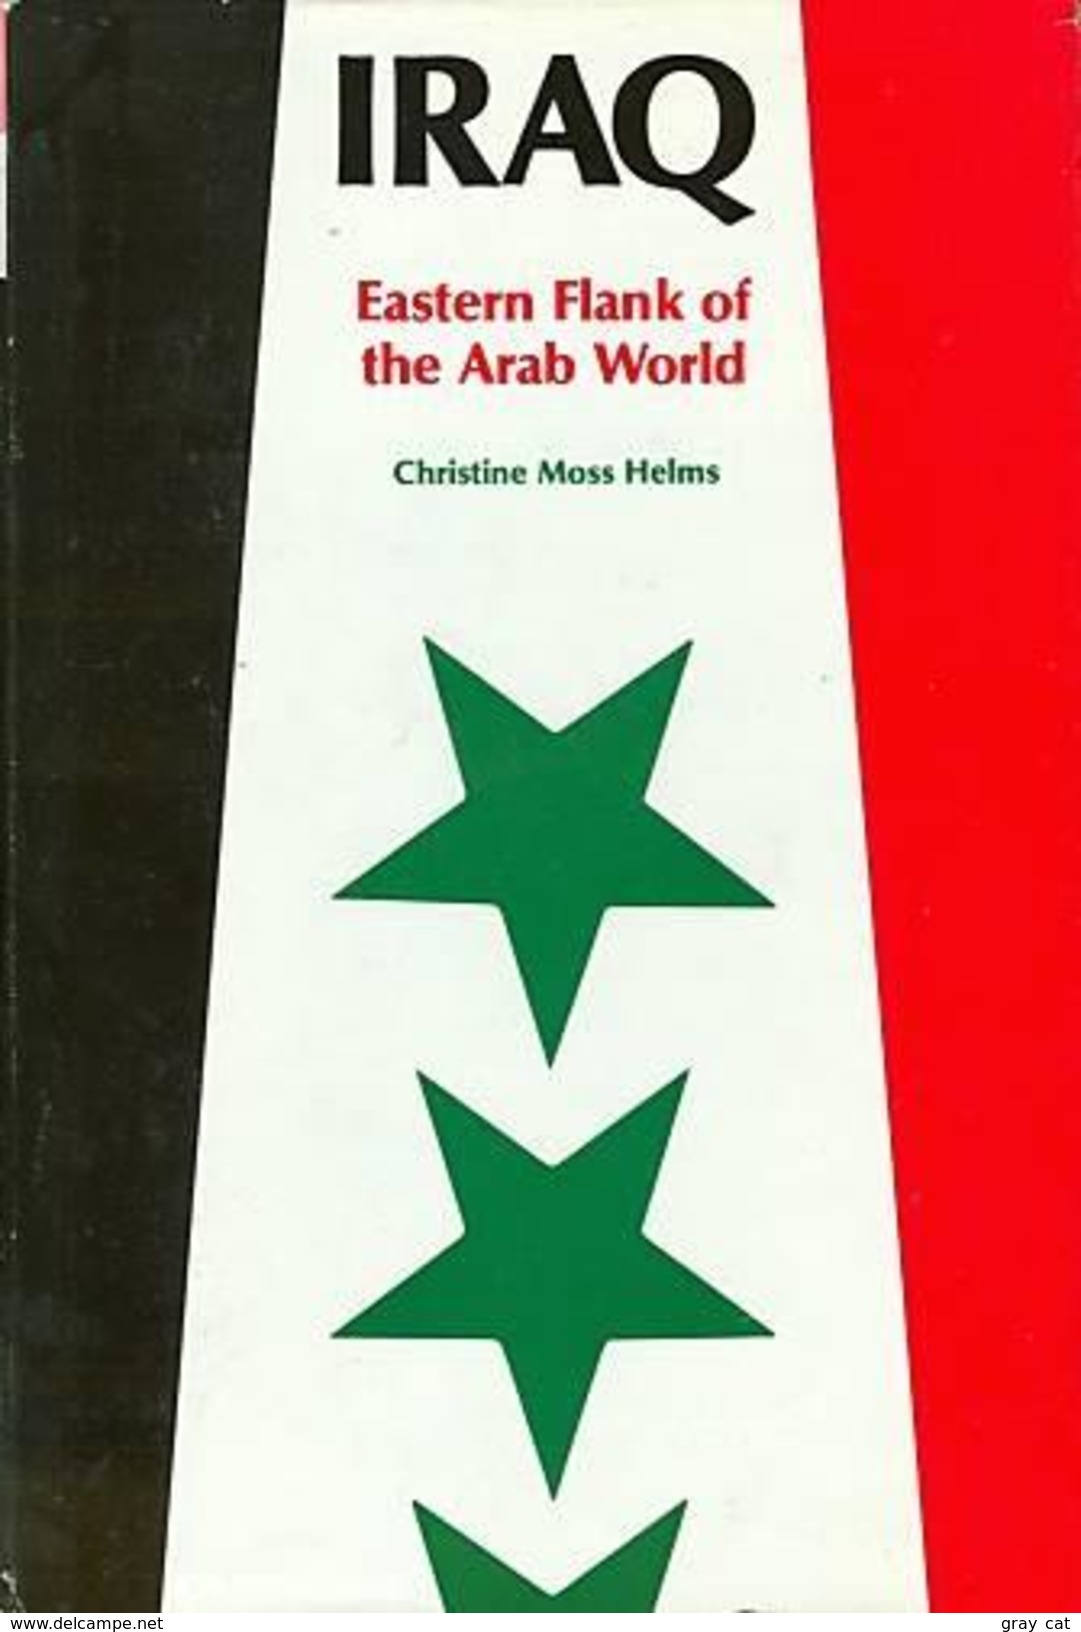 Iraq: Eastern Flank Of The Arab World By Christine Moss Helms (ISBN 9780815735564) - Nahost